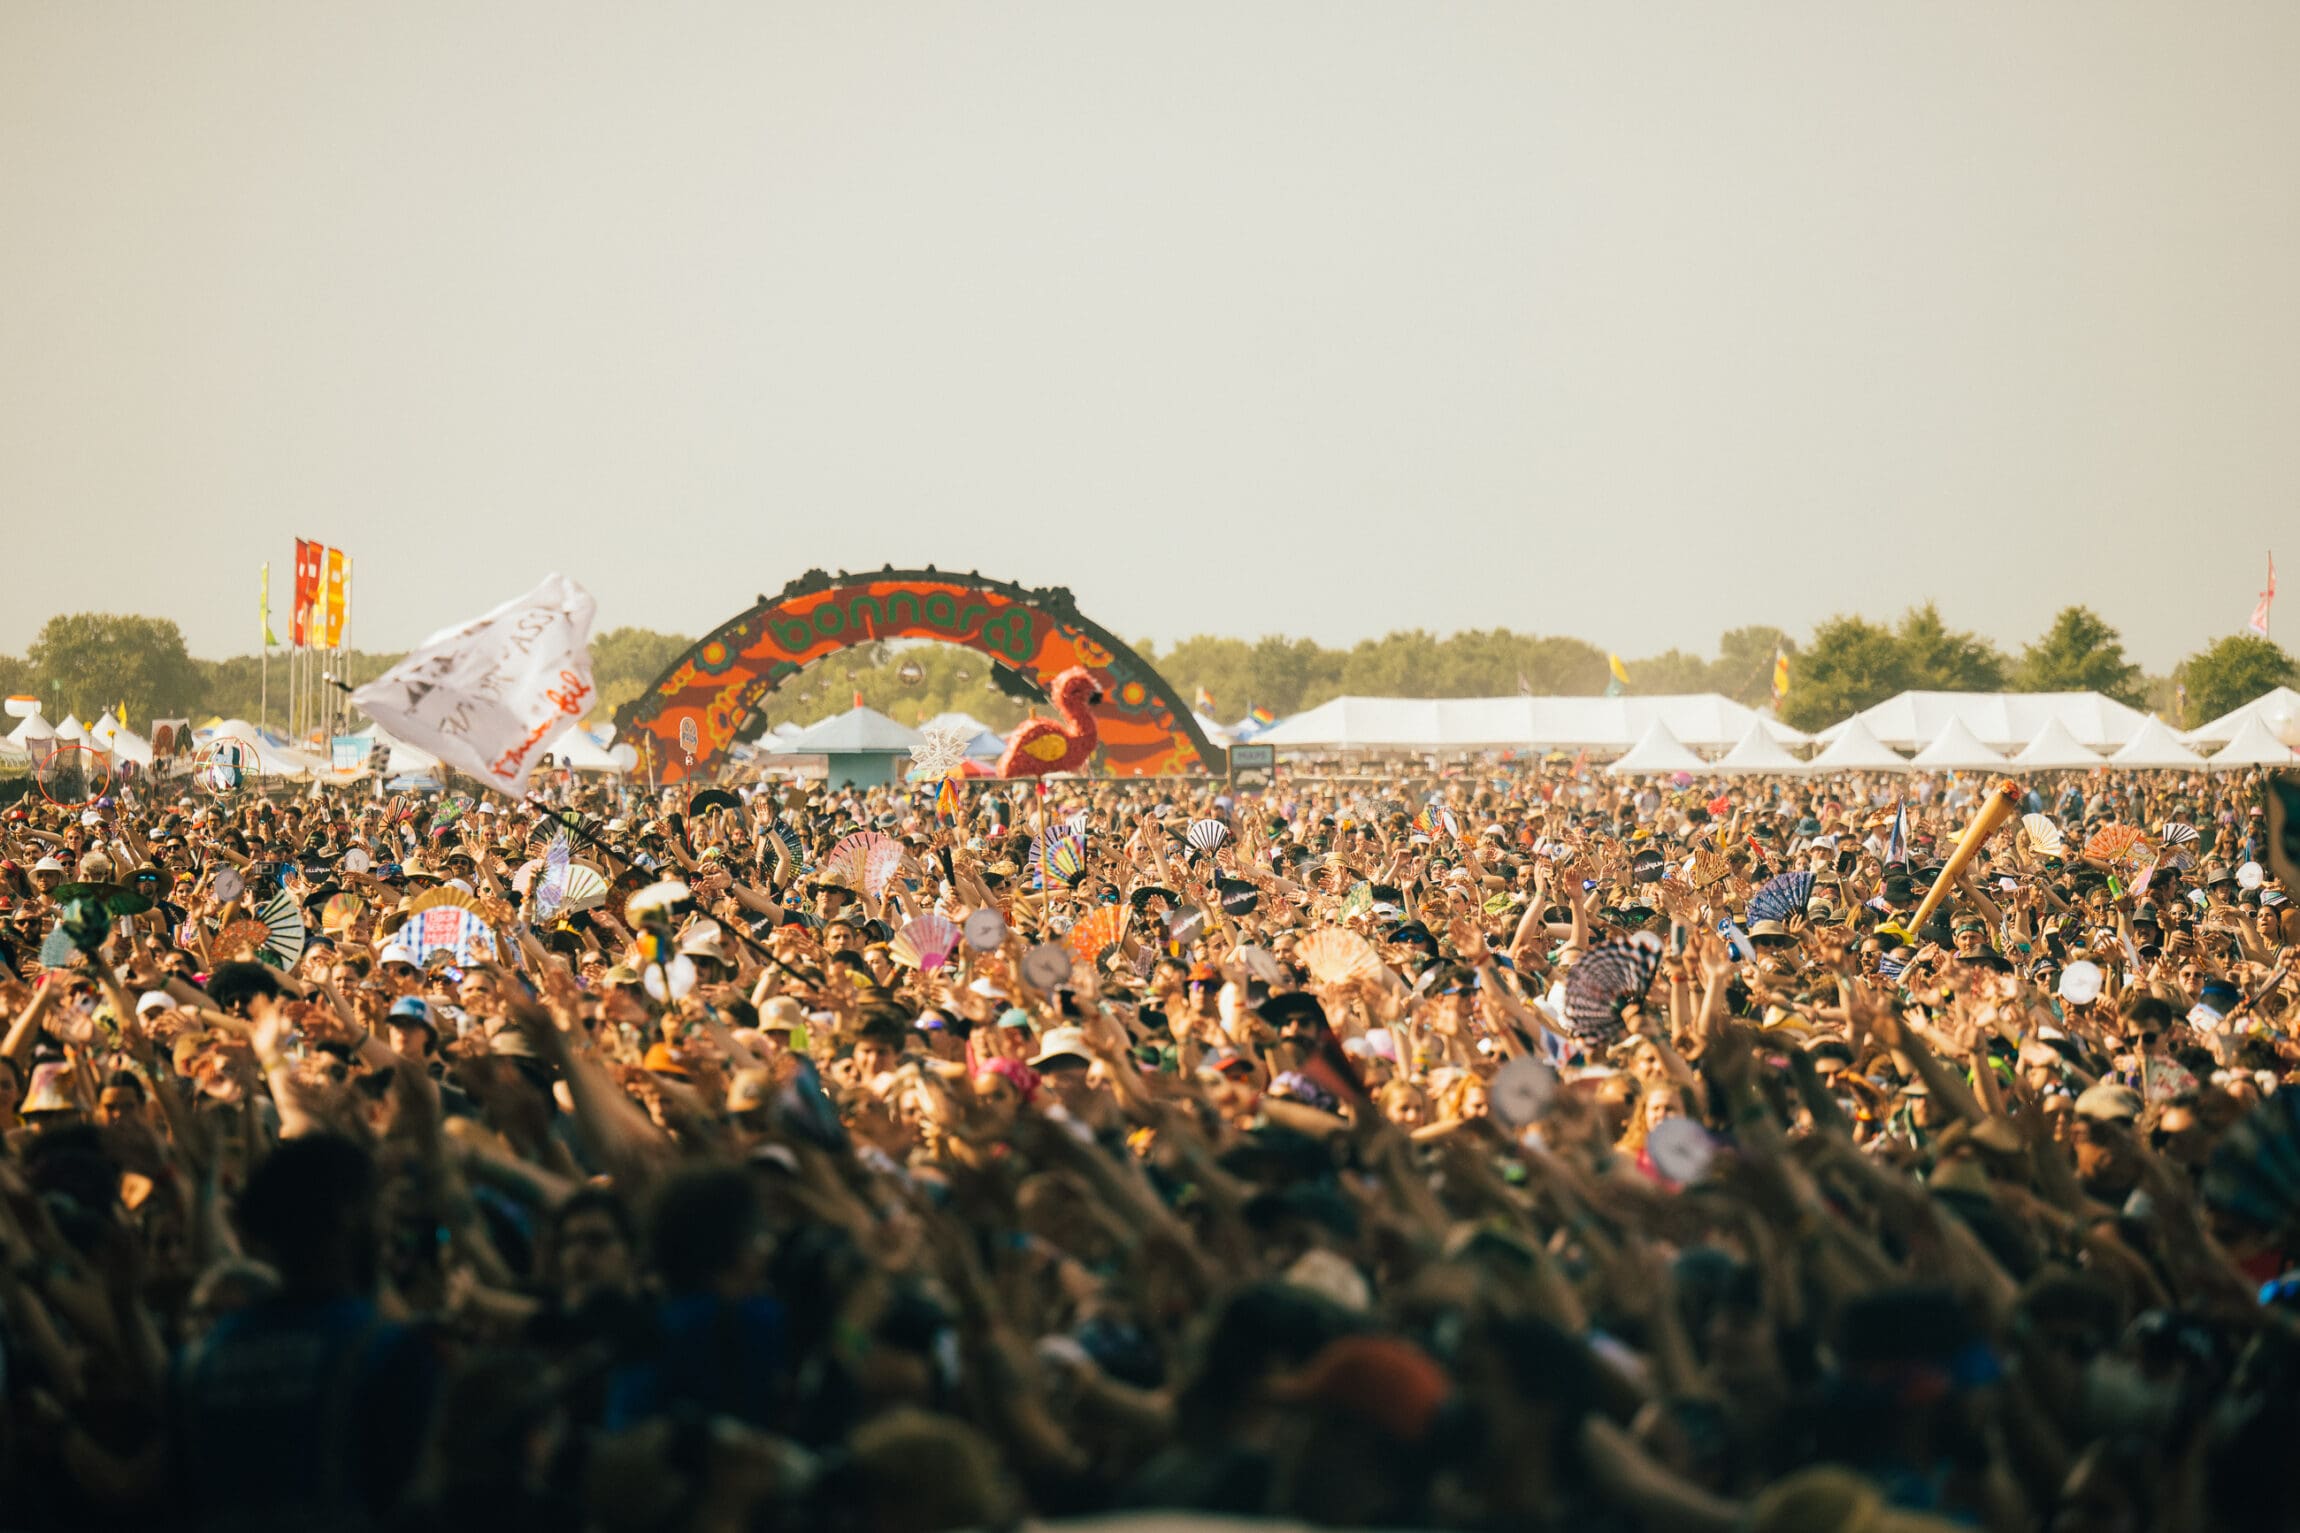 The best music festivals in the US | The crowd at Bonnaroo